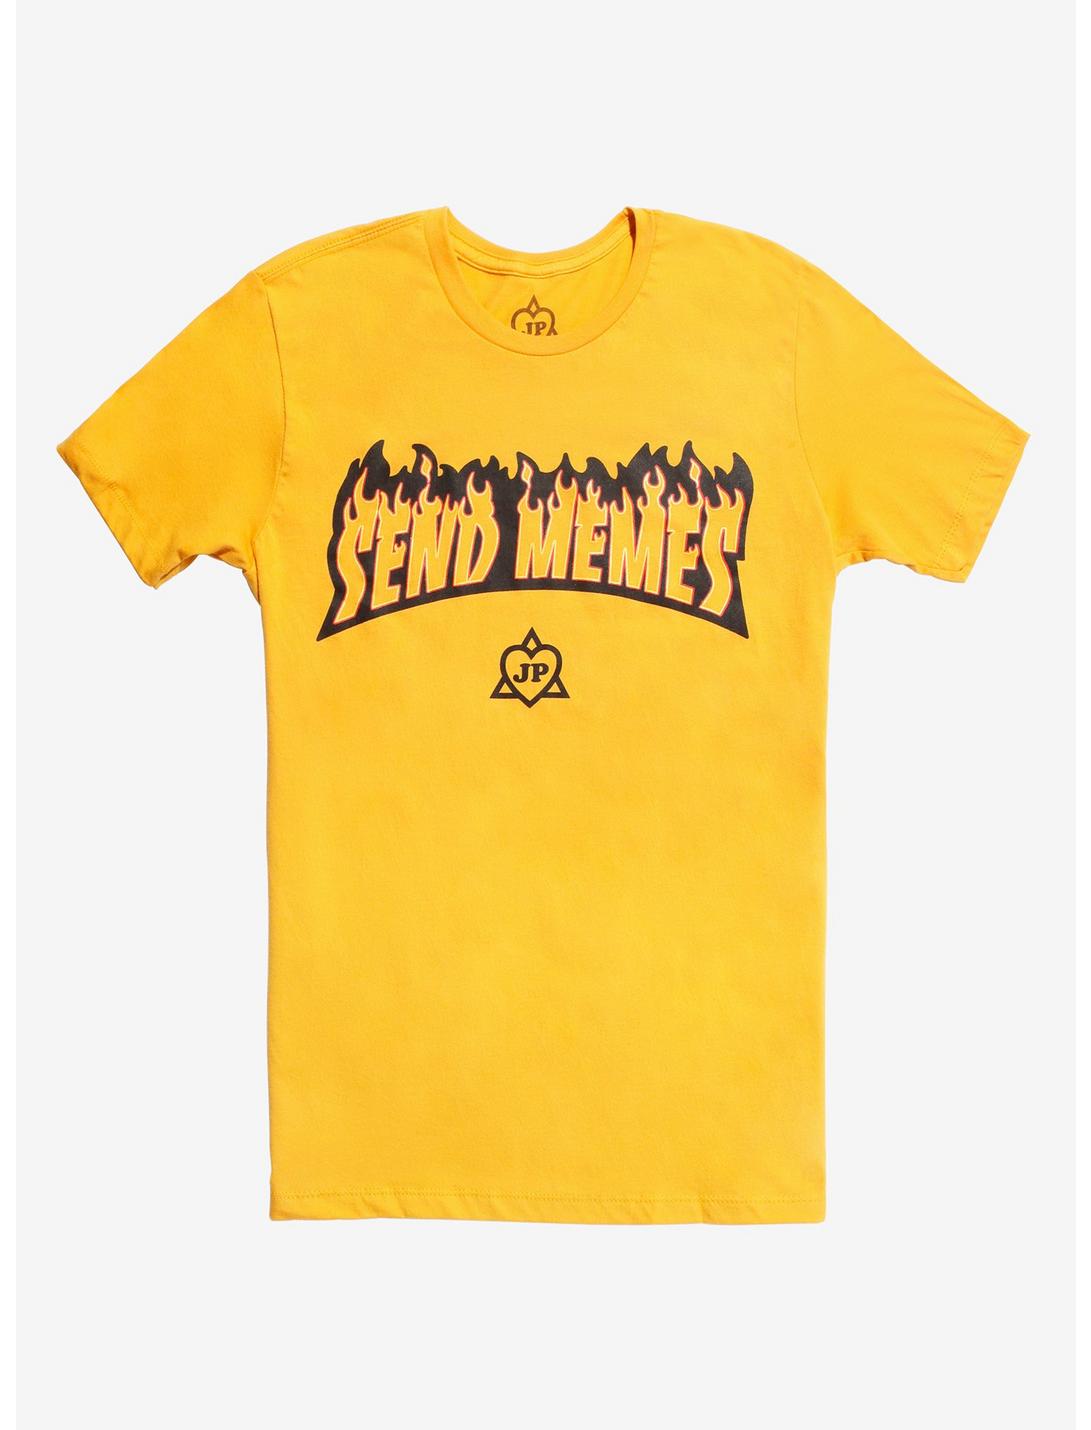 Jessie Paege Send Memes T-Shirt Hot Topic Exclusive, YELLOW, hi-res